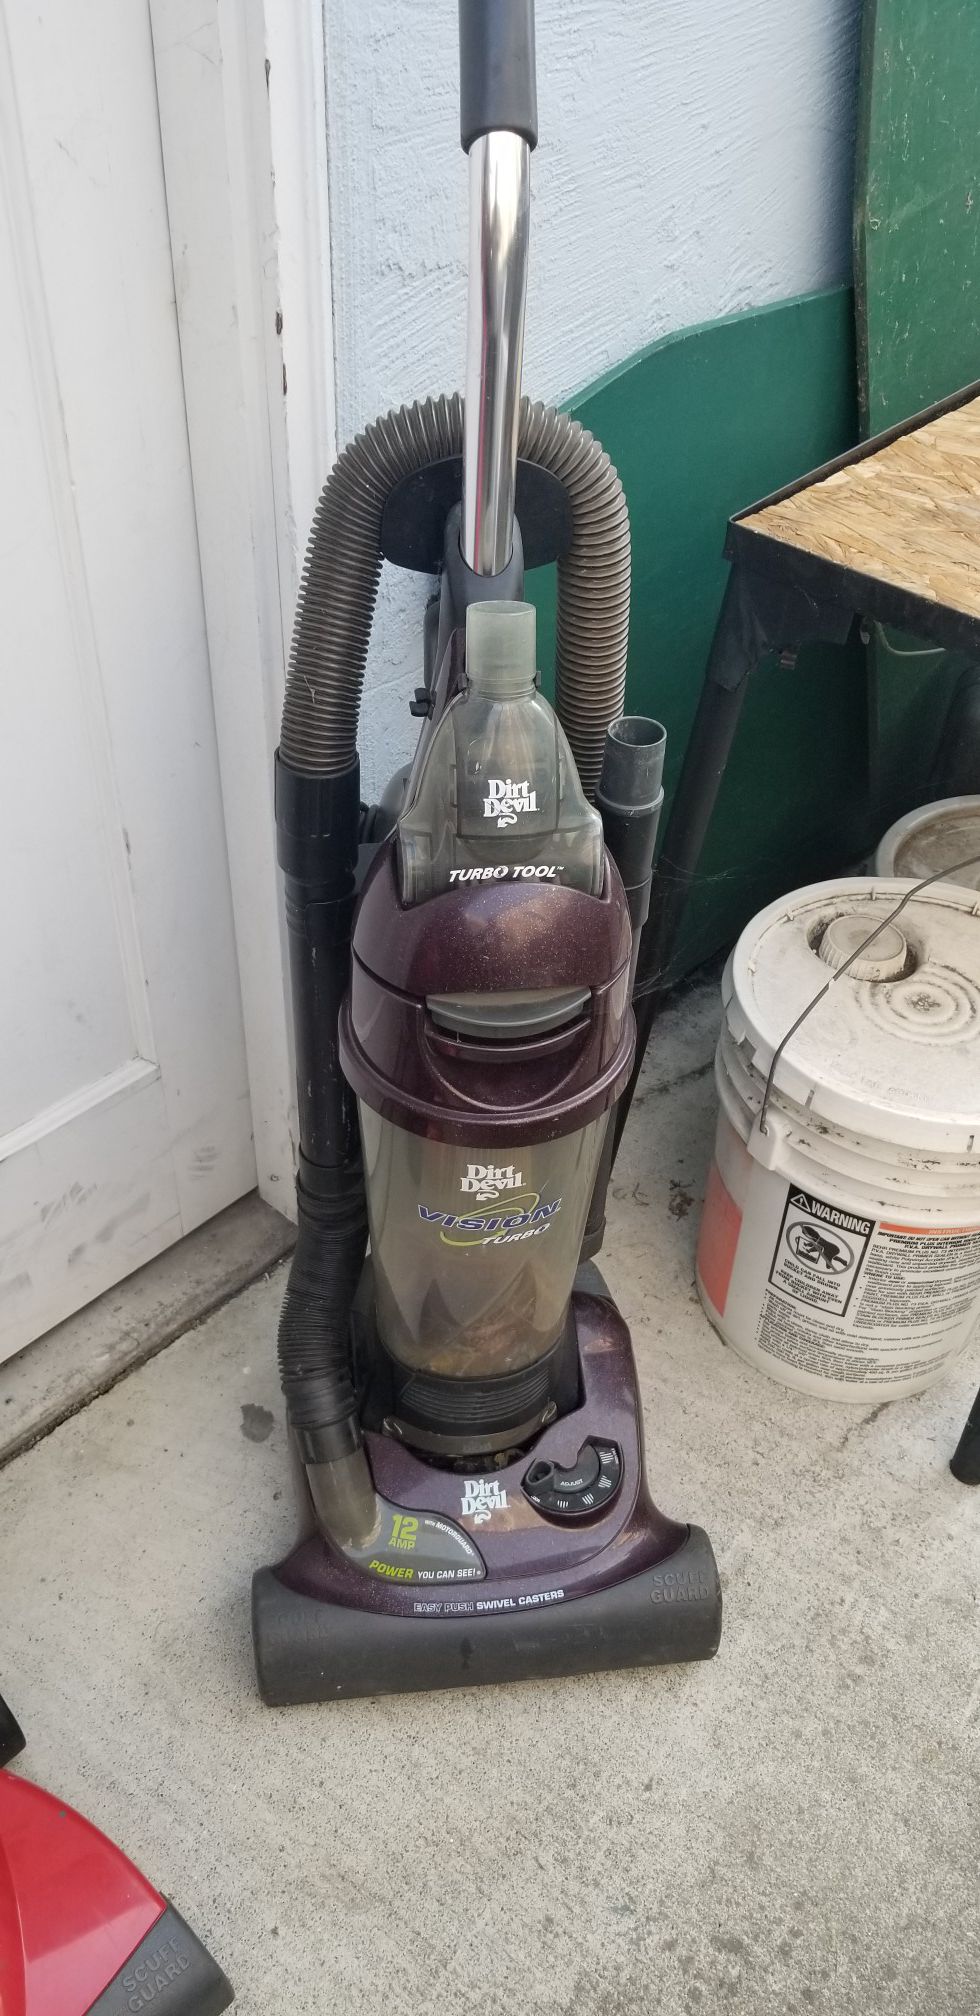 Bagless Vacuum Cleaner - Good working condition